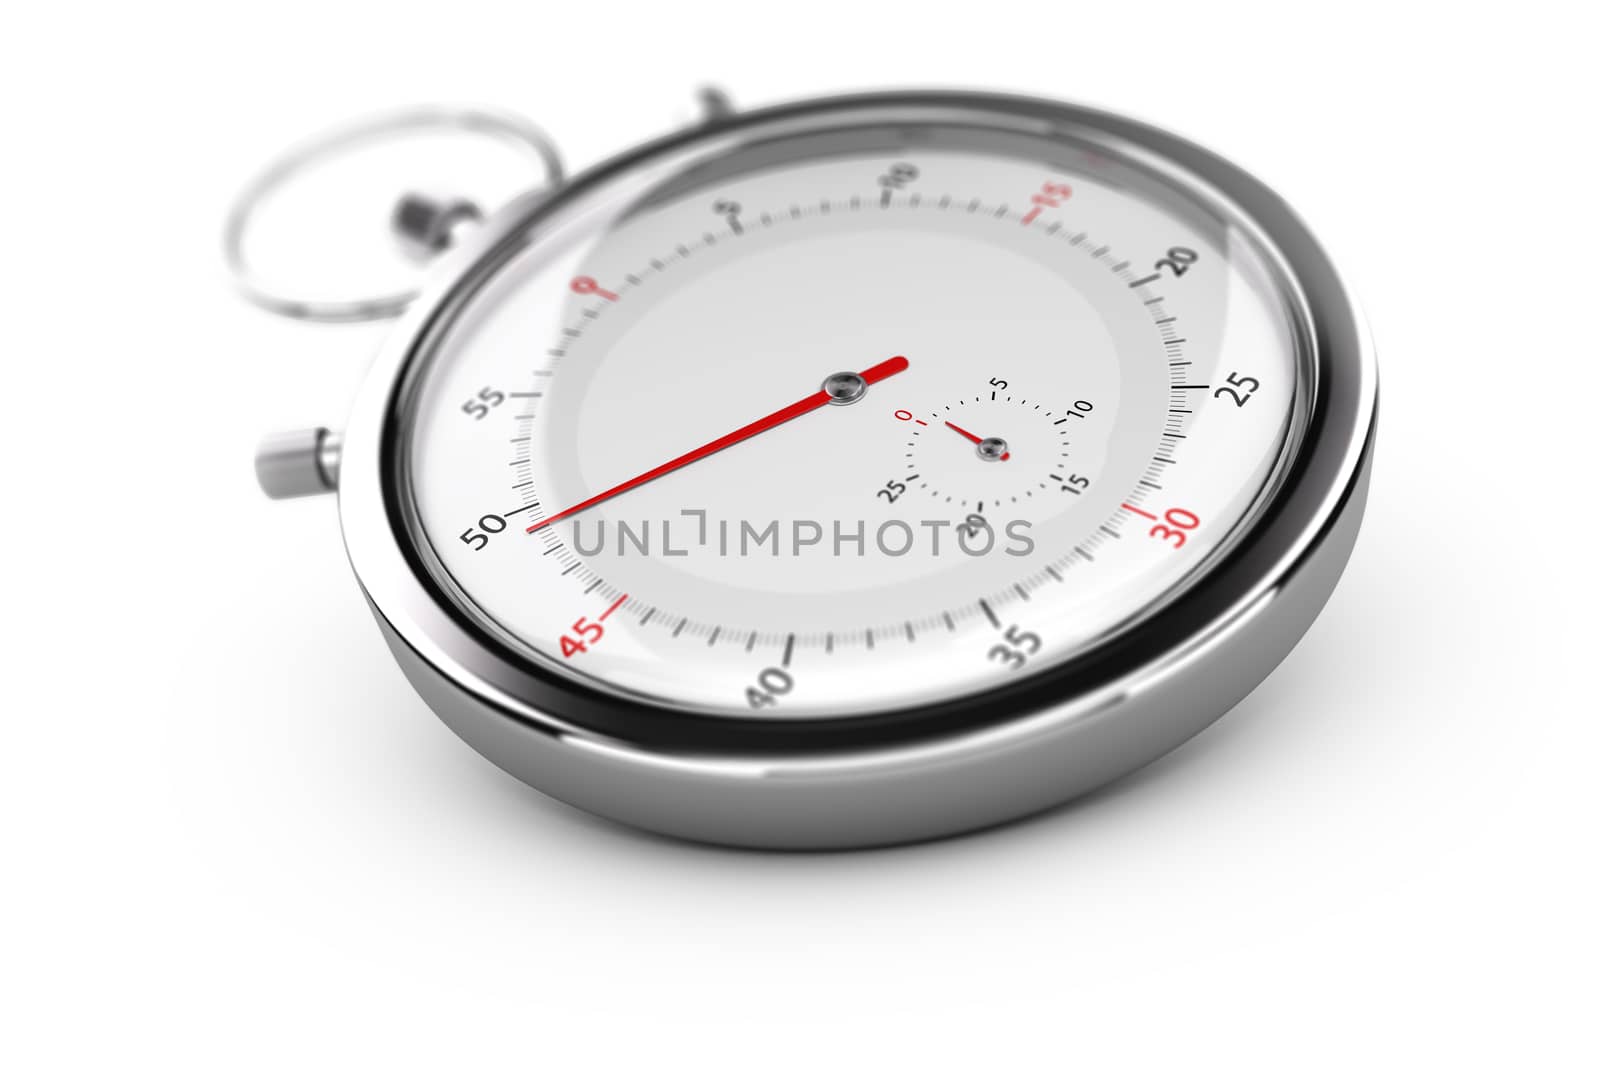 Chronograph with red needles over white background, blur effect. Concept of measurement or punctuality 